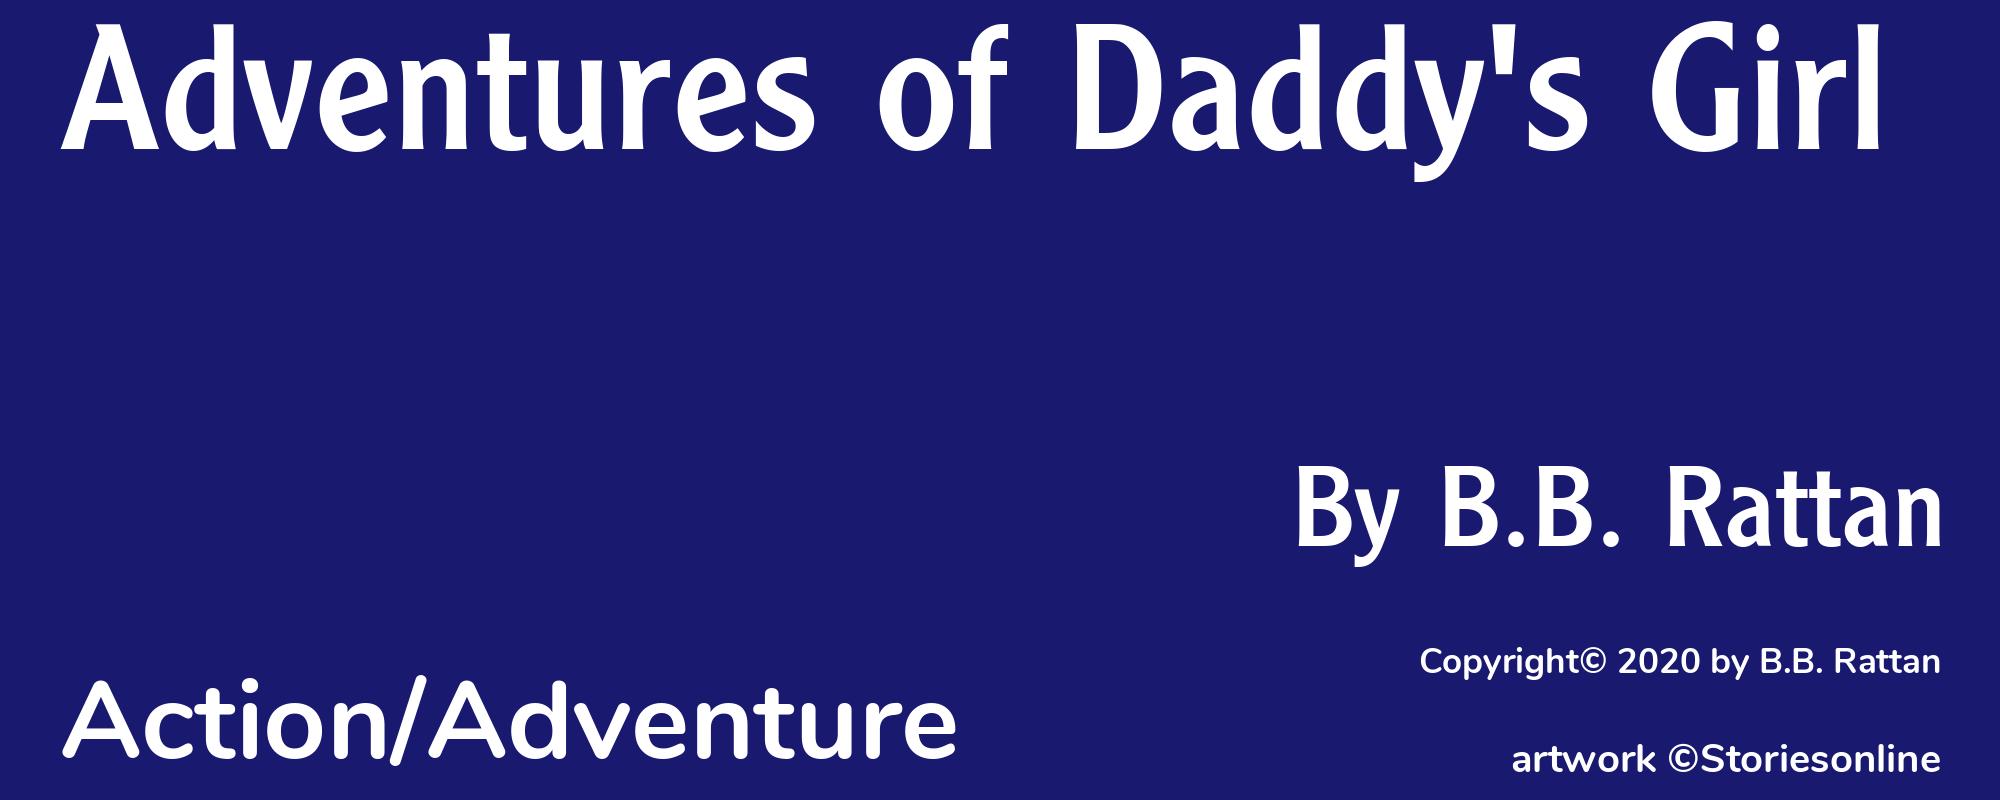 Adventures of Daddy's Girl - Cover